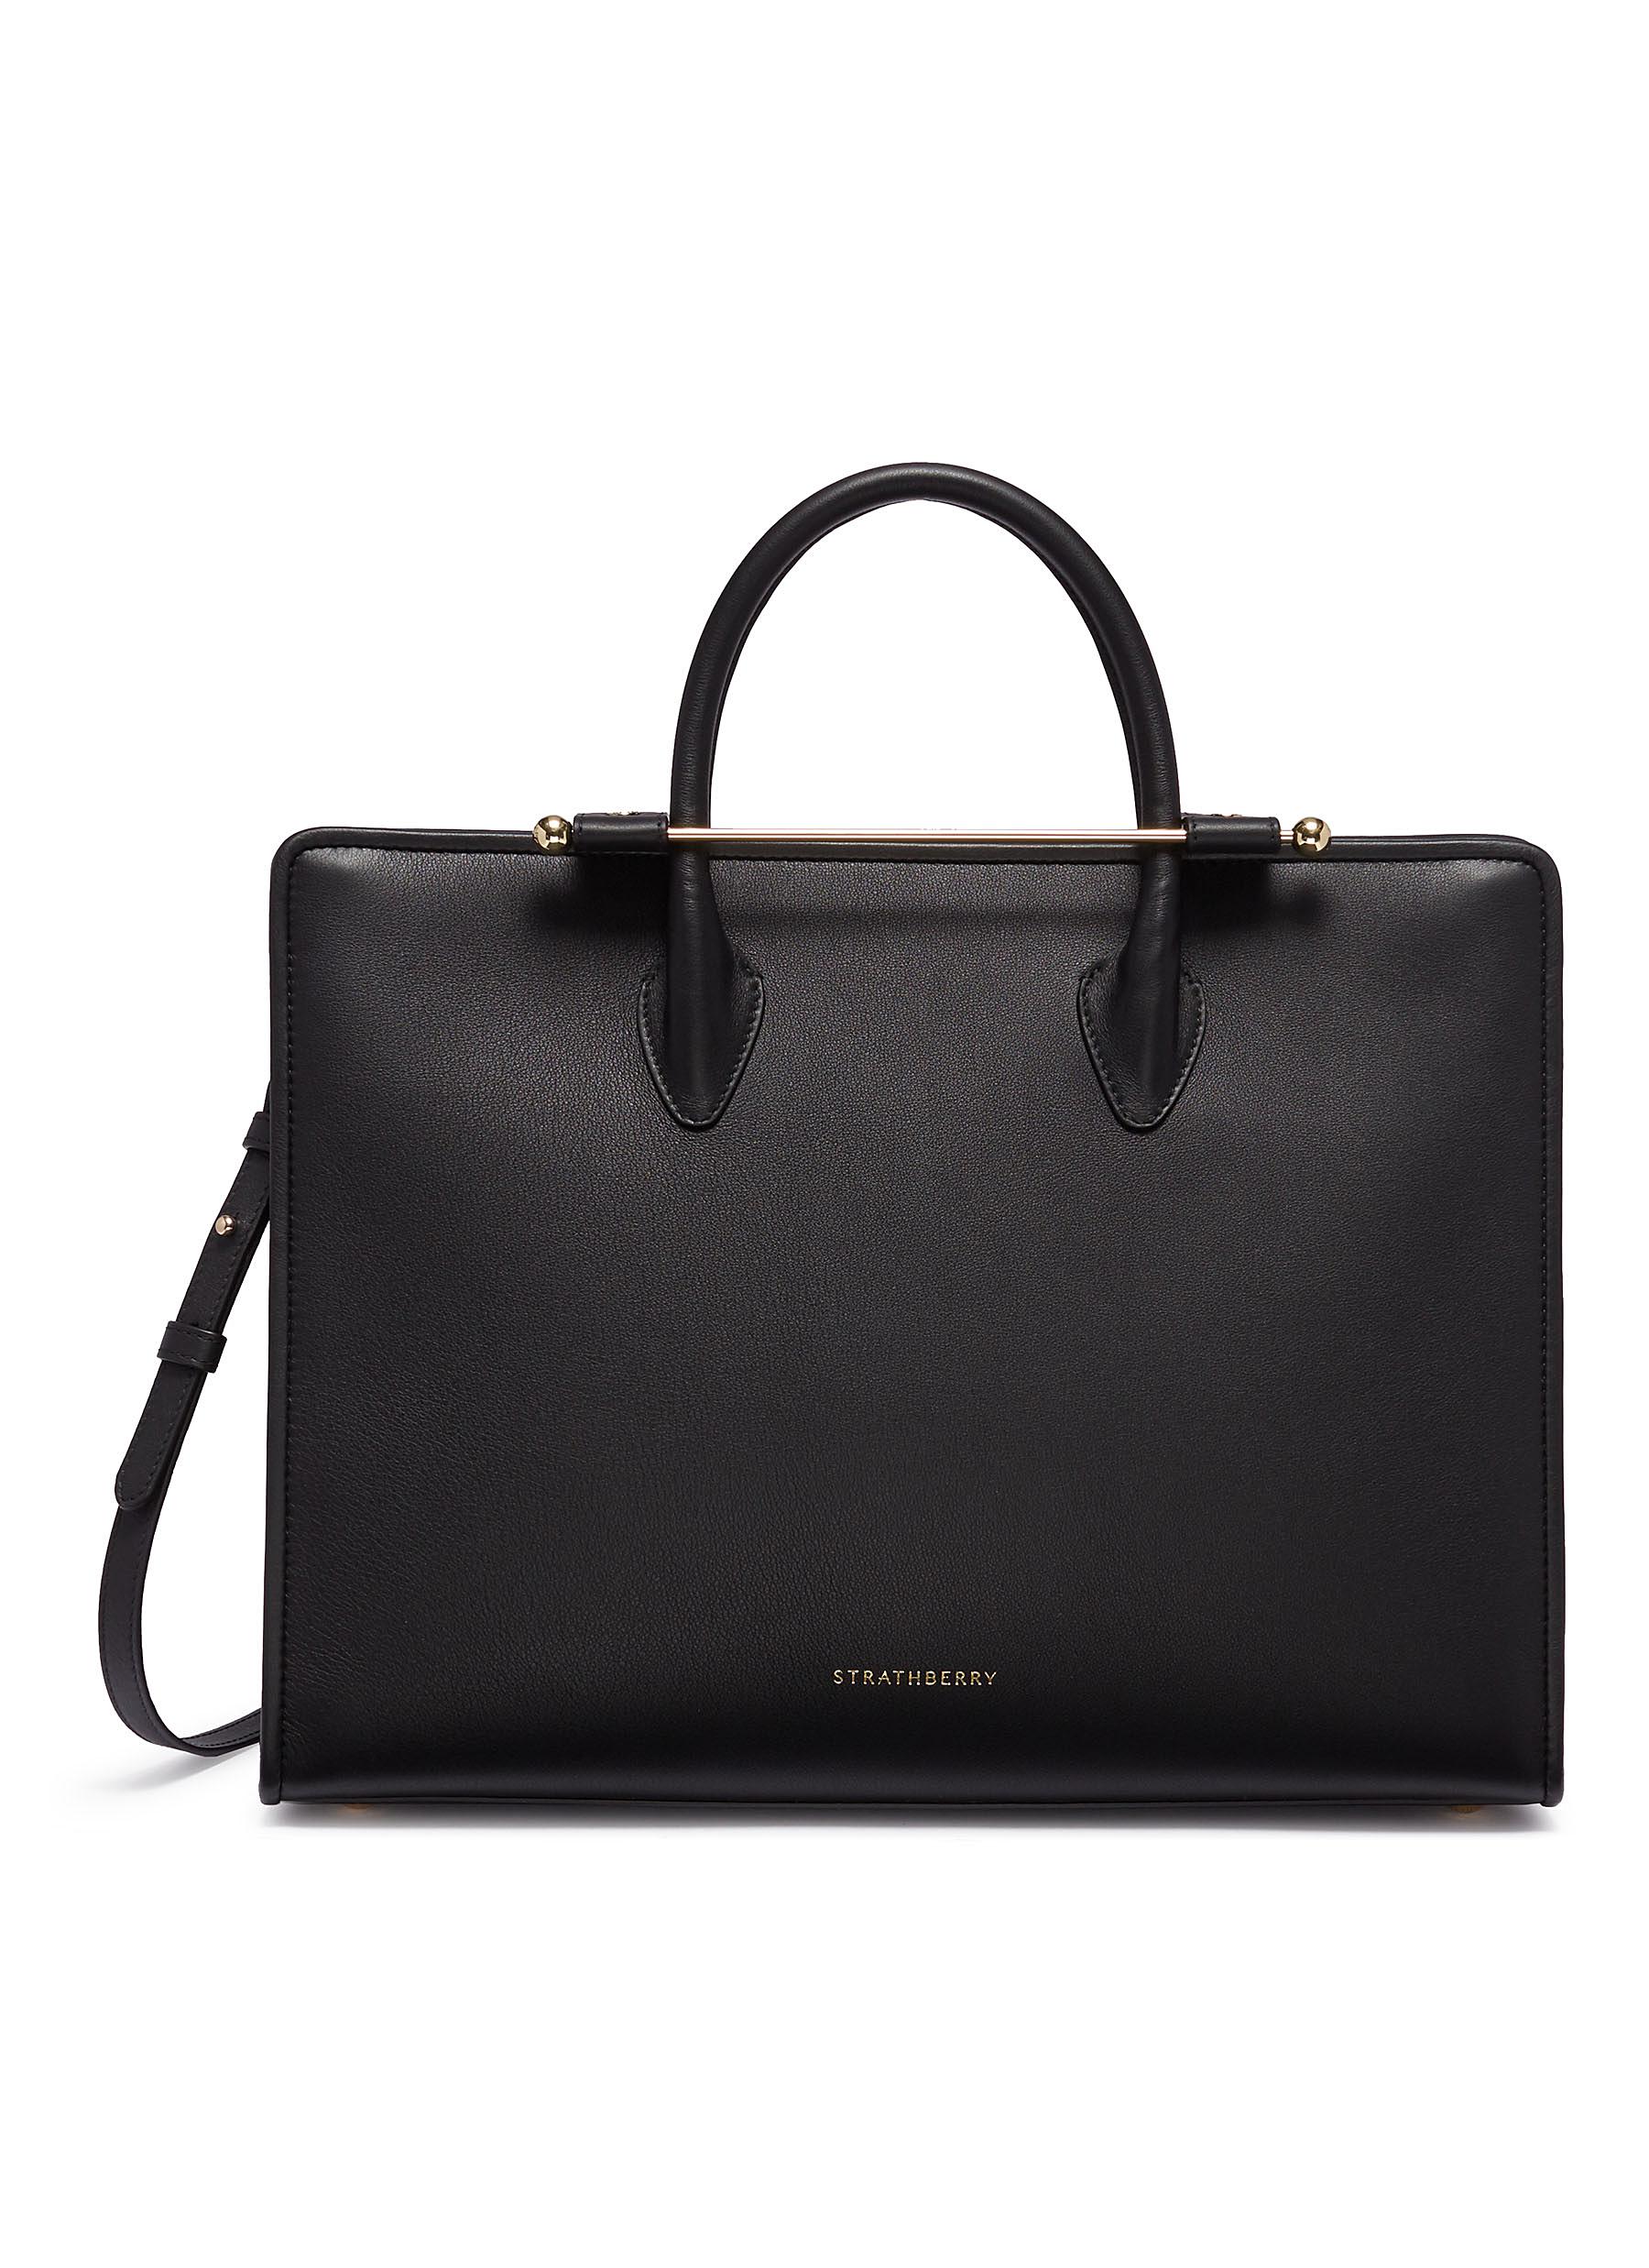 Strathberry 'The Strathberry' leather tote